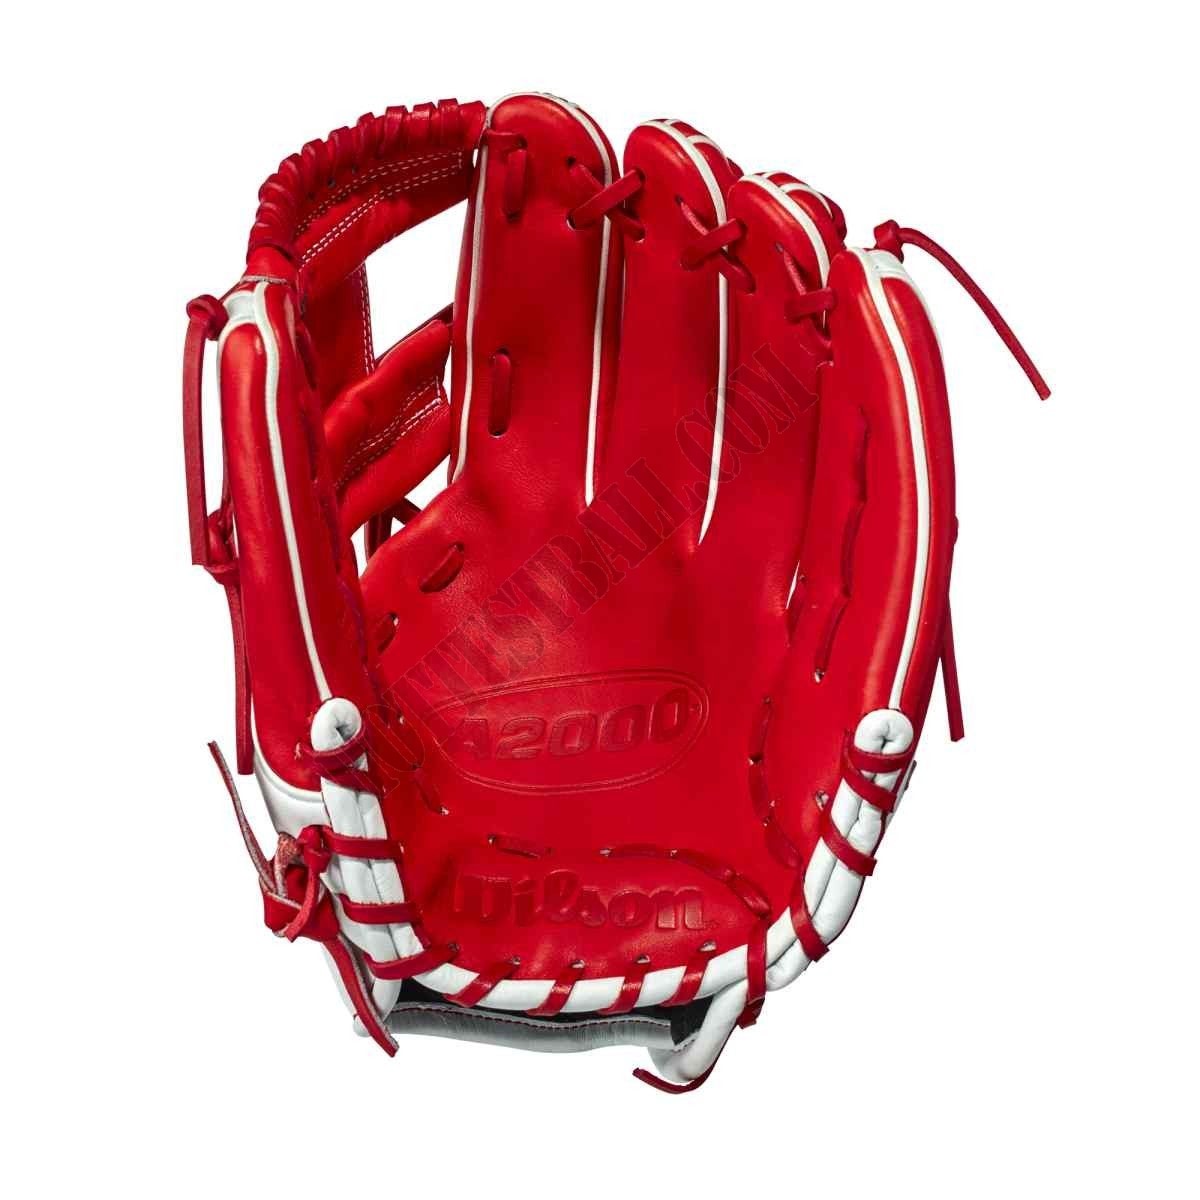 2021 A2000 1786 Canada 11.5" Infield Baseball Glove - Limited Edition ● Wilson Promotions - -2